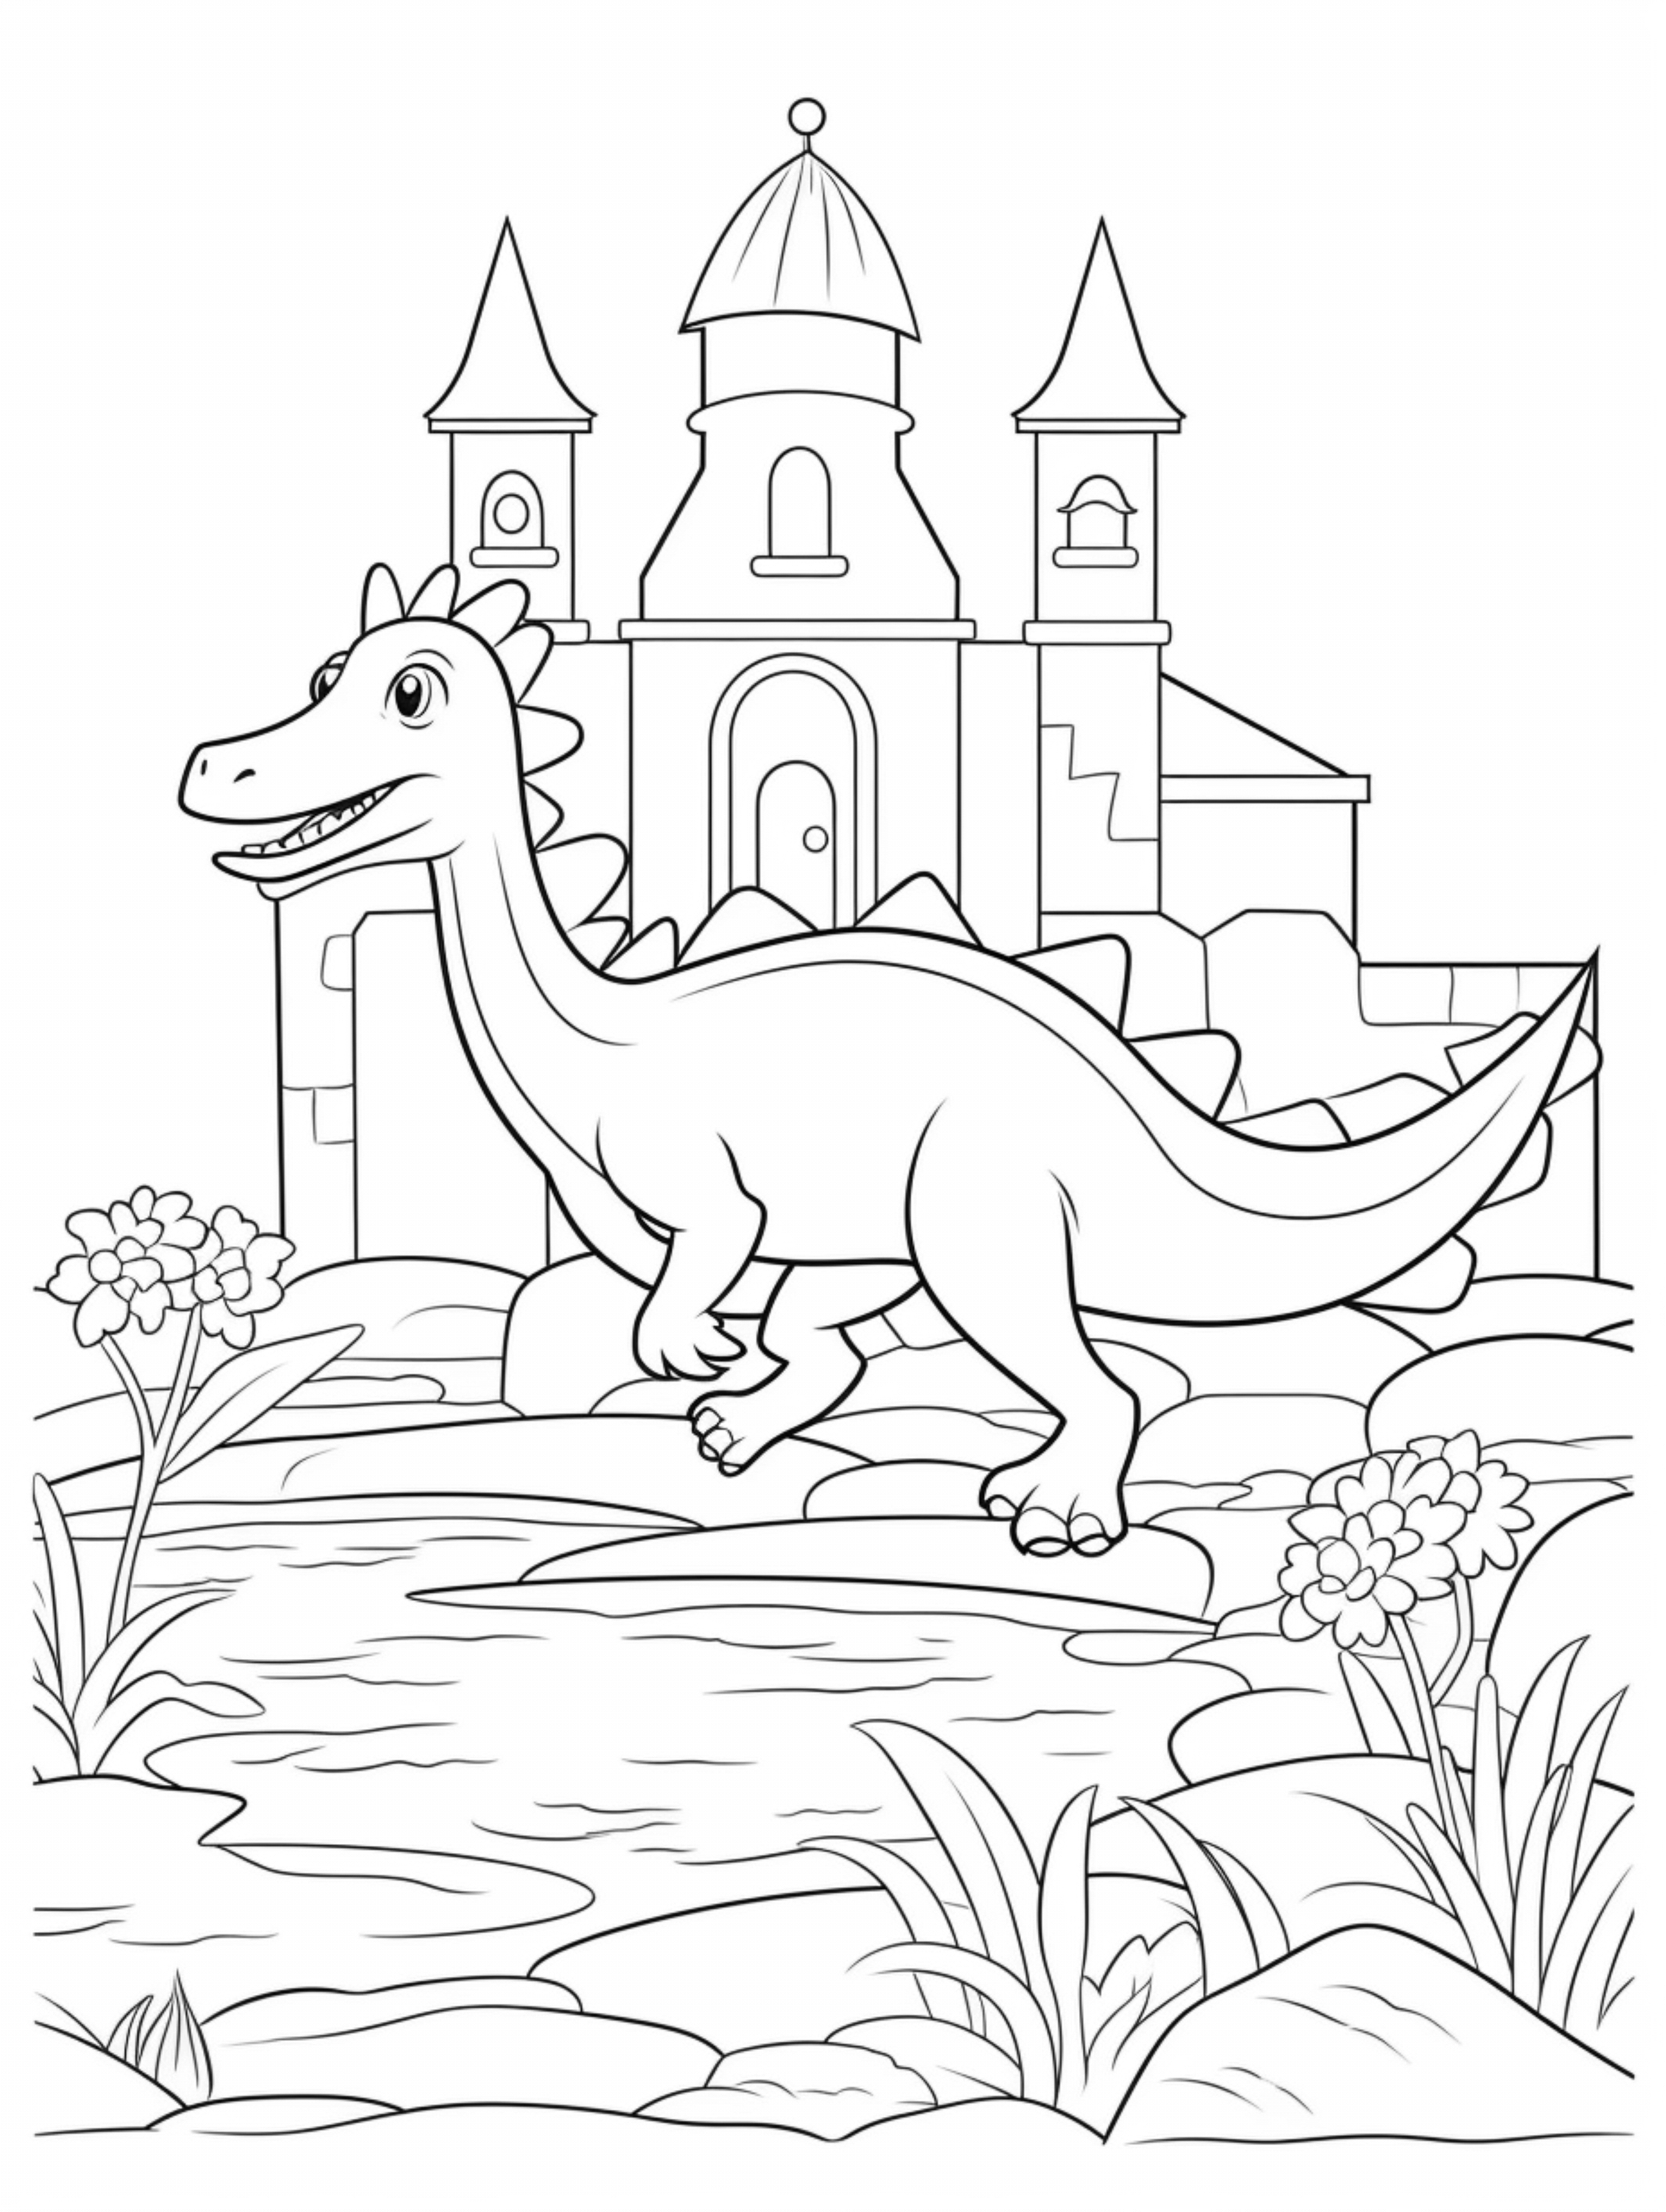 01 cute spinosaurus in its habitat coloring page for